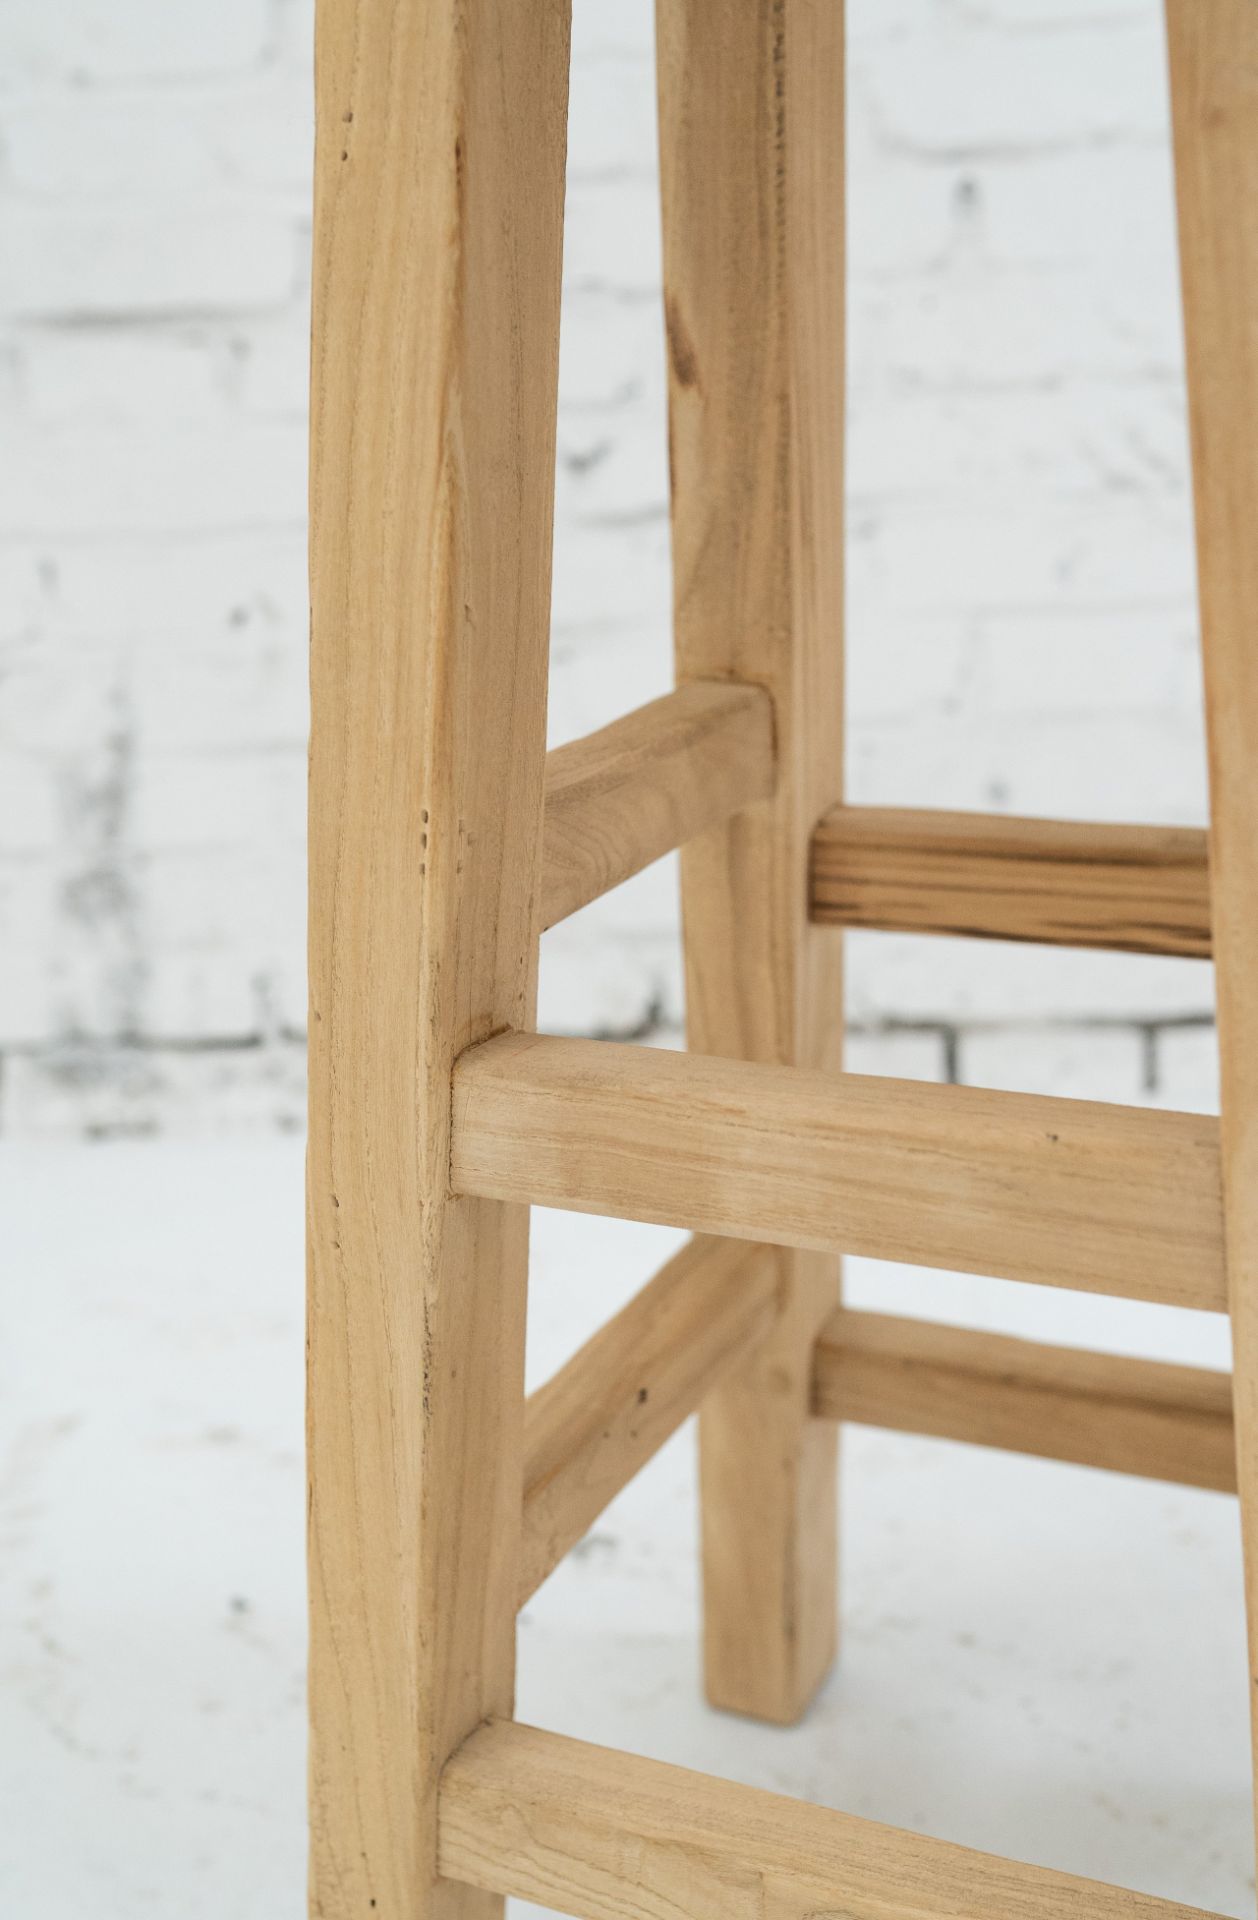 Tall Elm Stool: Stunning wooden bar stools from the Heibei province of China. - Image 4 of 4